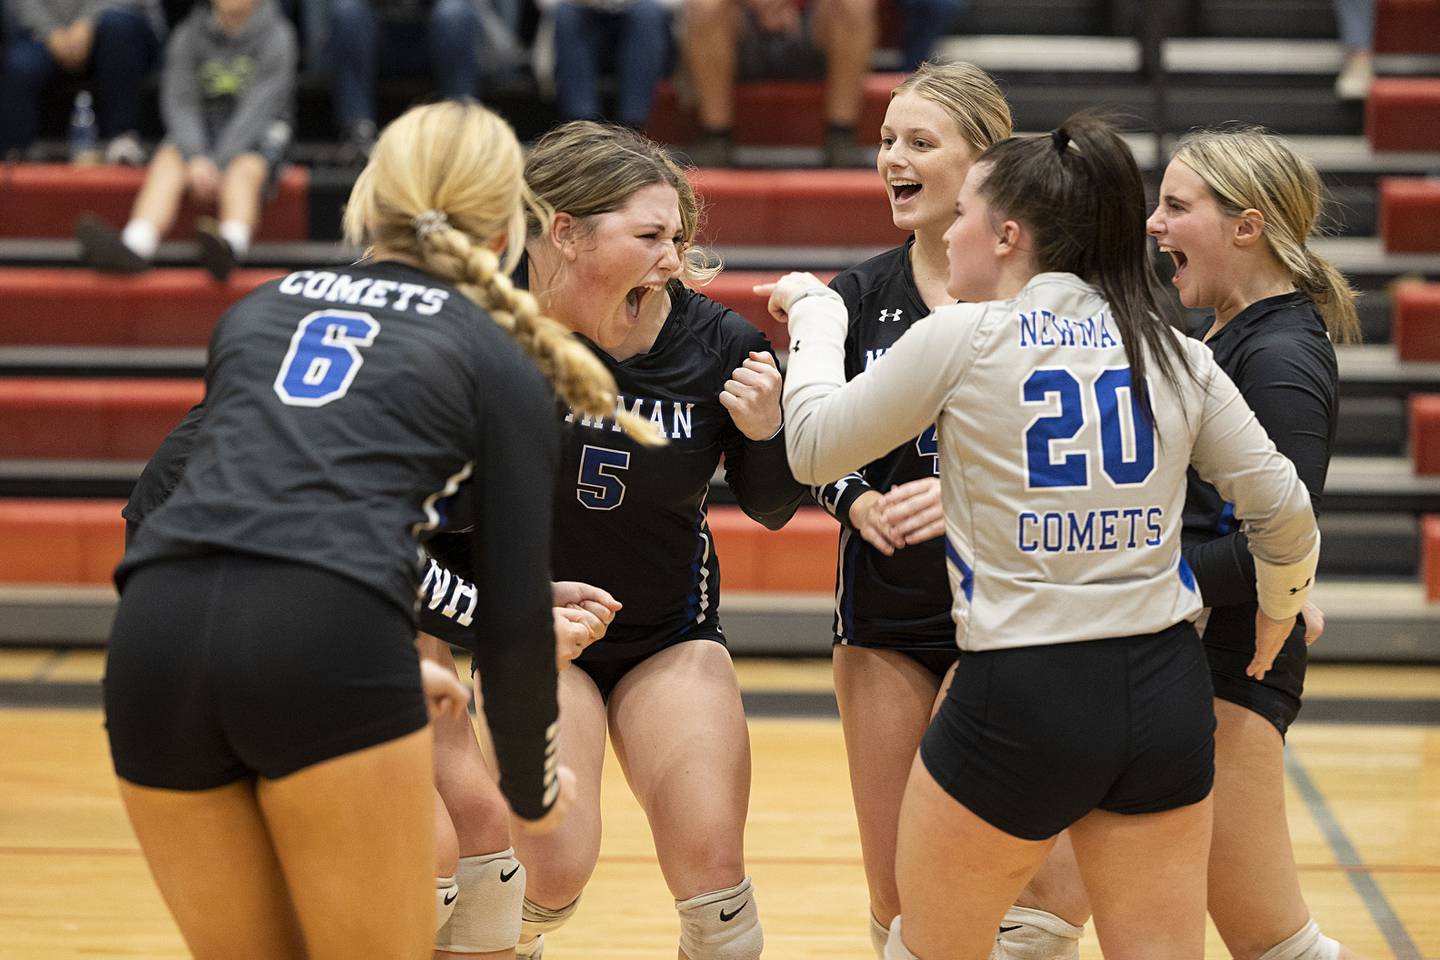 The Newman Comets celebrate a point Wednesday, Nov. 2, 2022 in the sectional championship game against River Ridge.